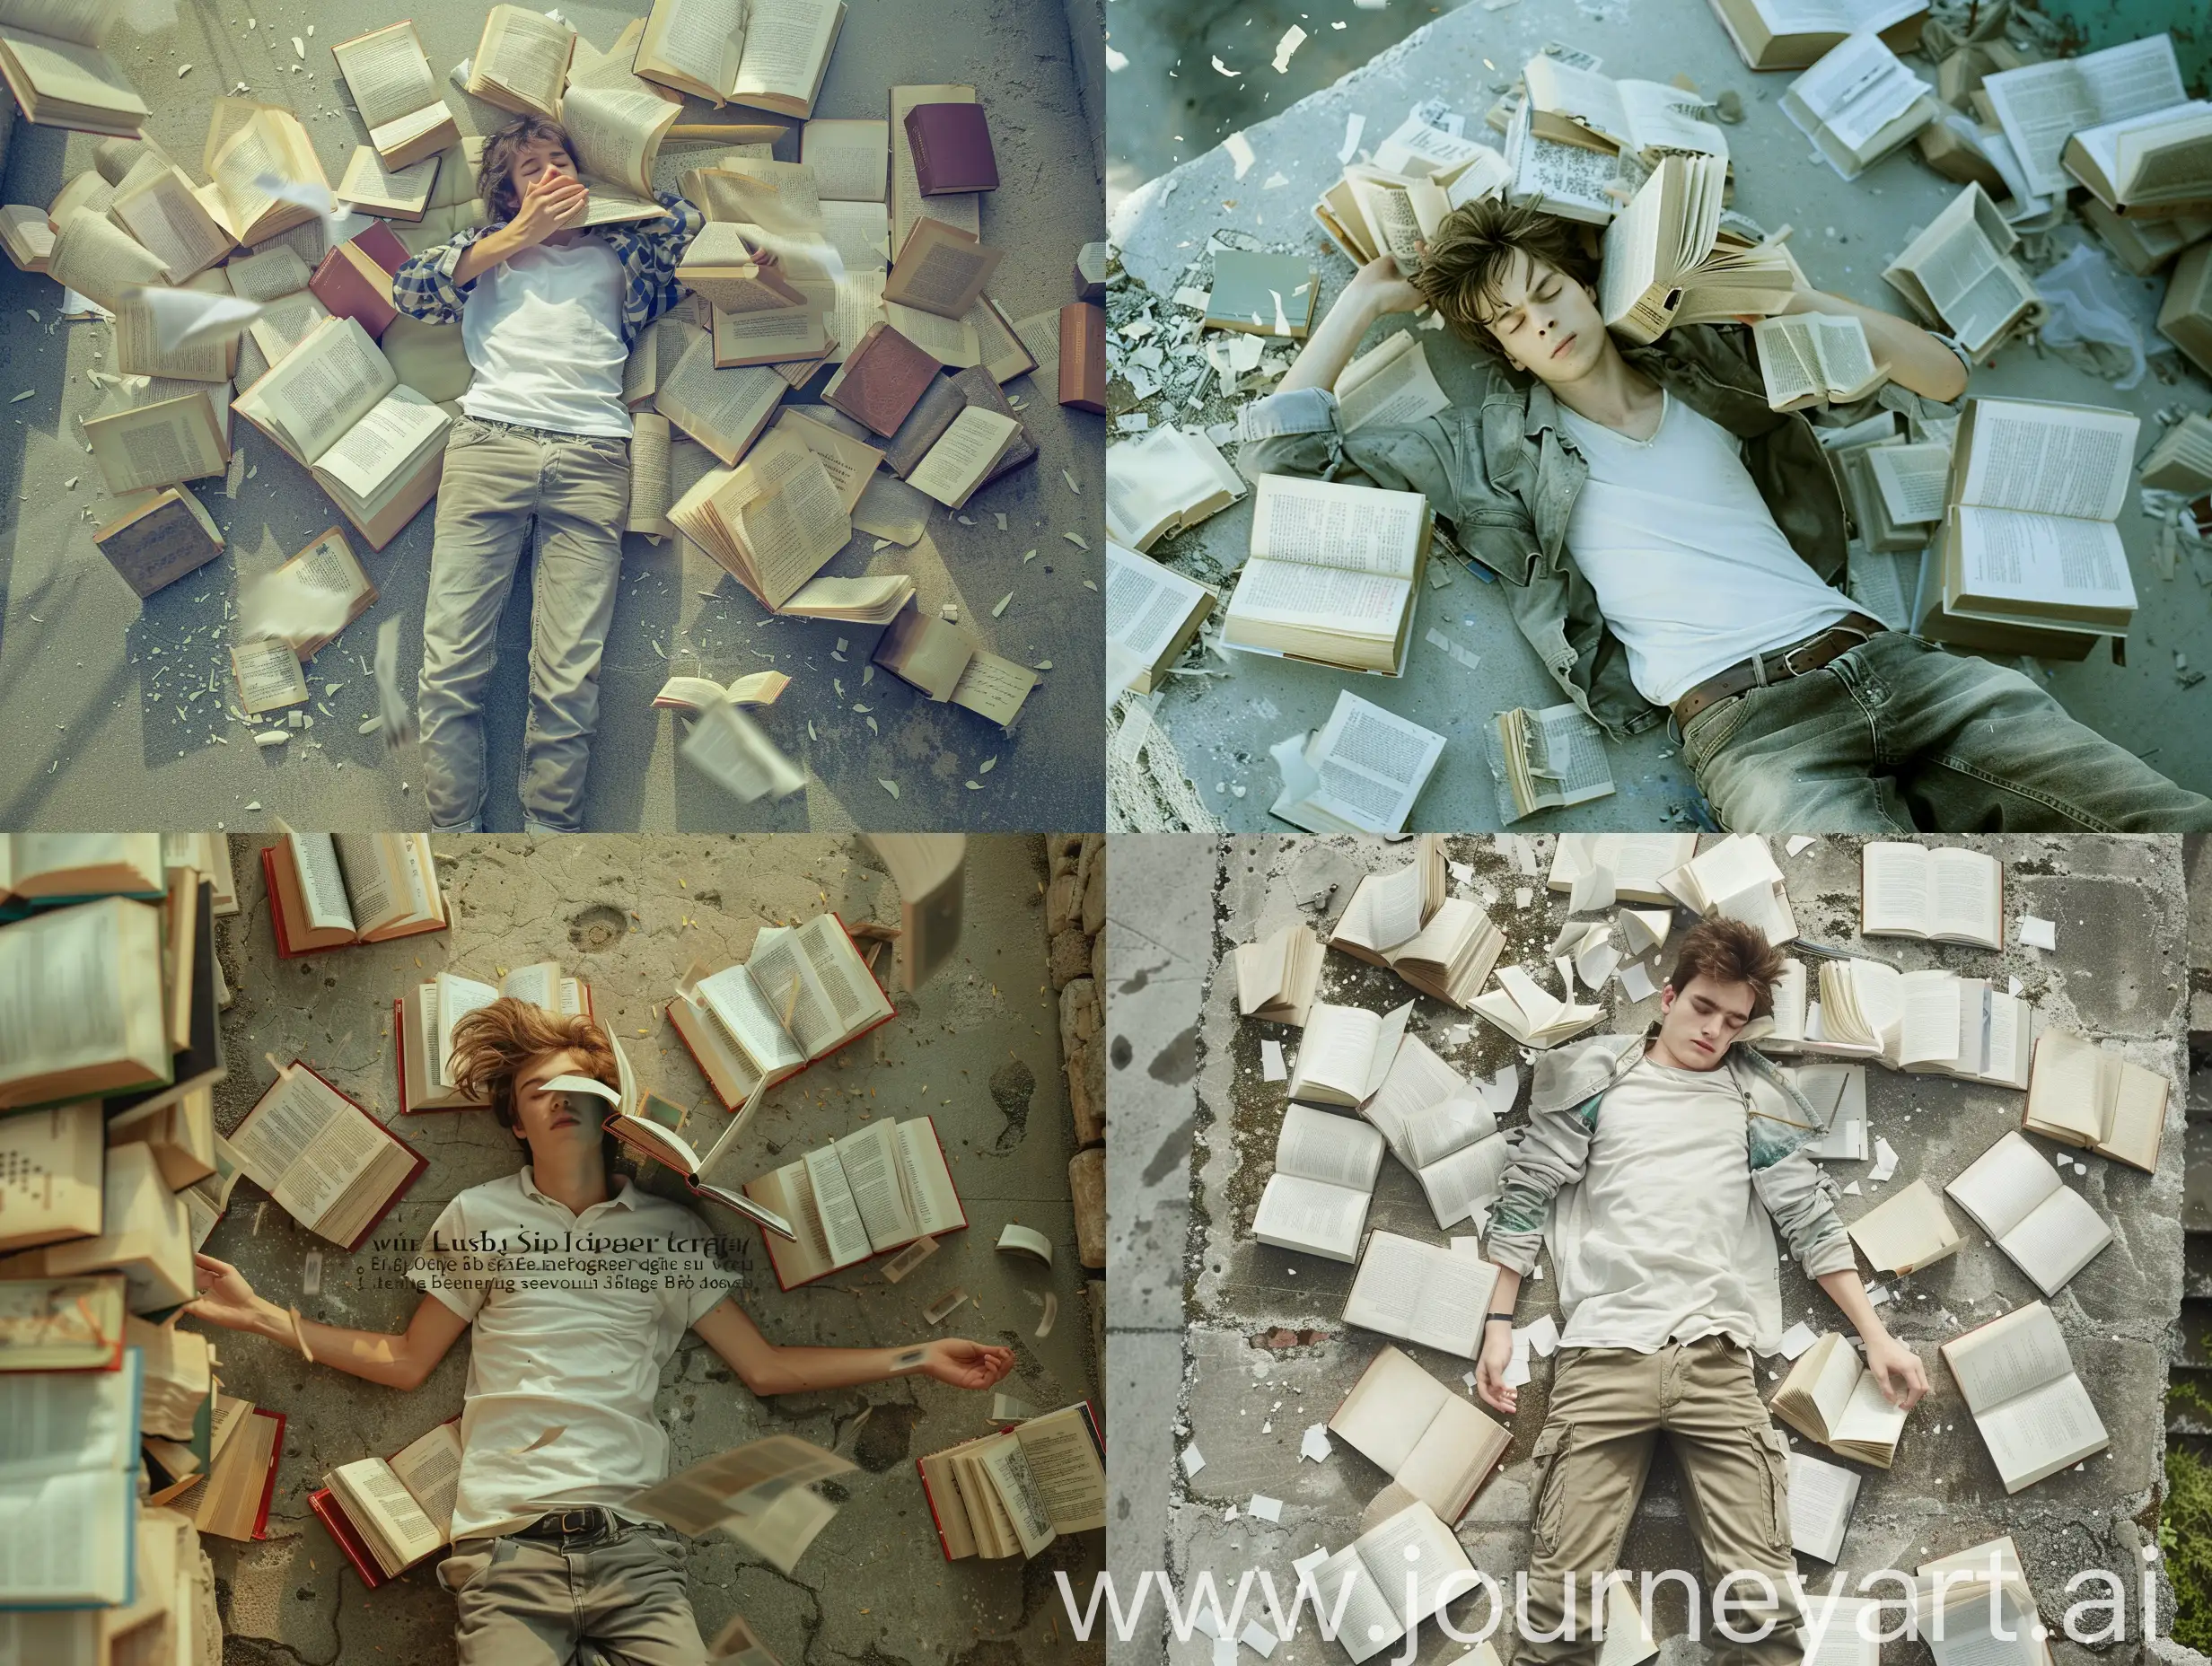 a young man is laying down, on a place made of concrete, wearing casual clothing, full of opened books around him, some pages are flying and one of the books is covering his face like he is sleeping